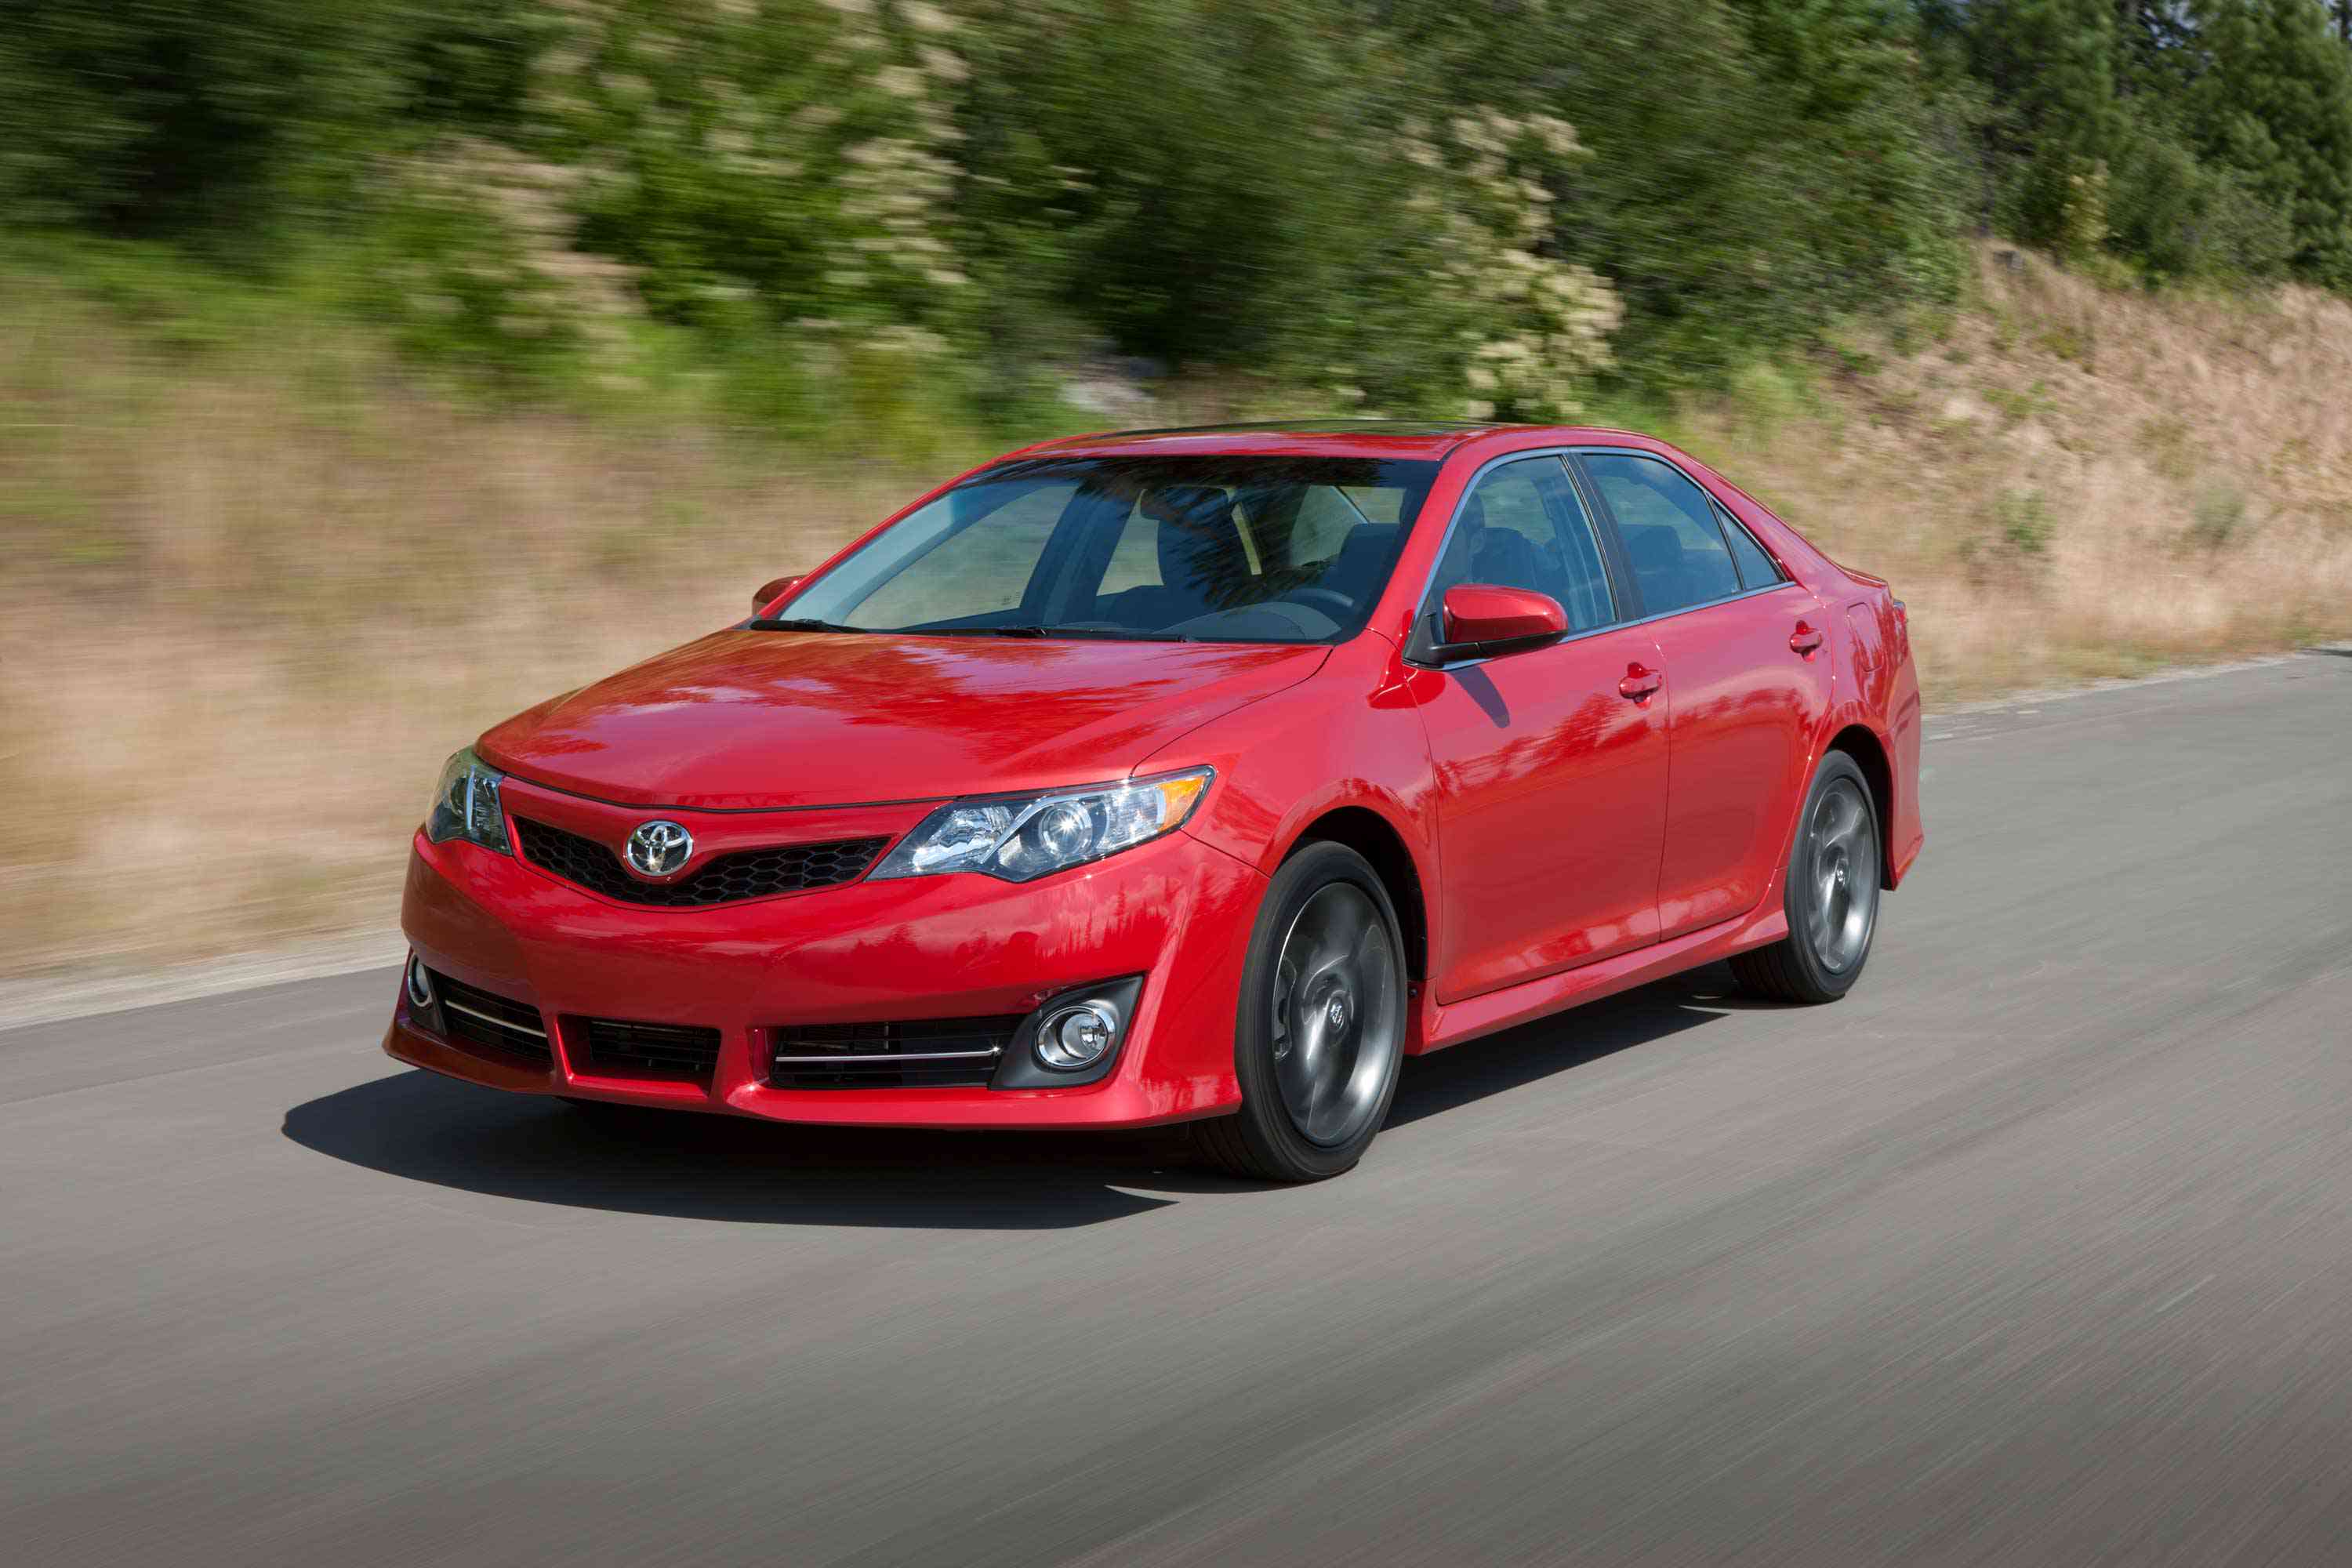 2013 Toyota Camry Review, Ratings, Specs, Prices, and Photos - The Car Connection